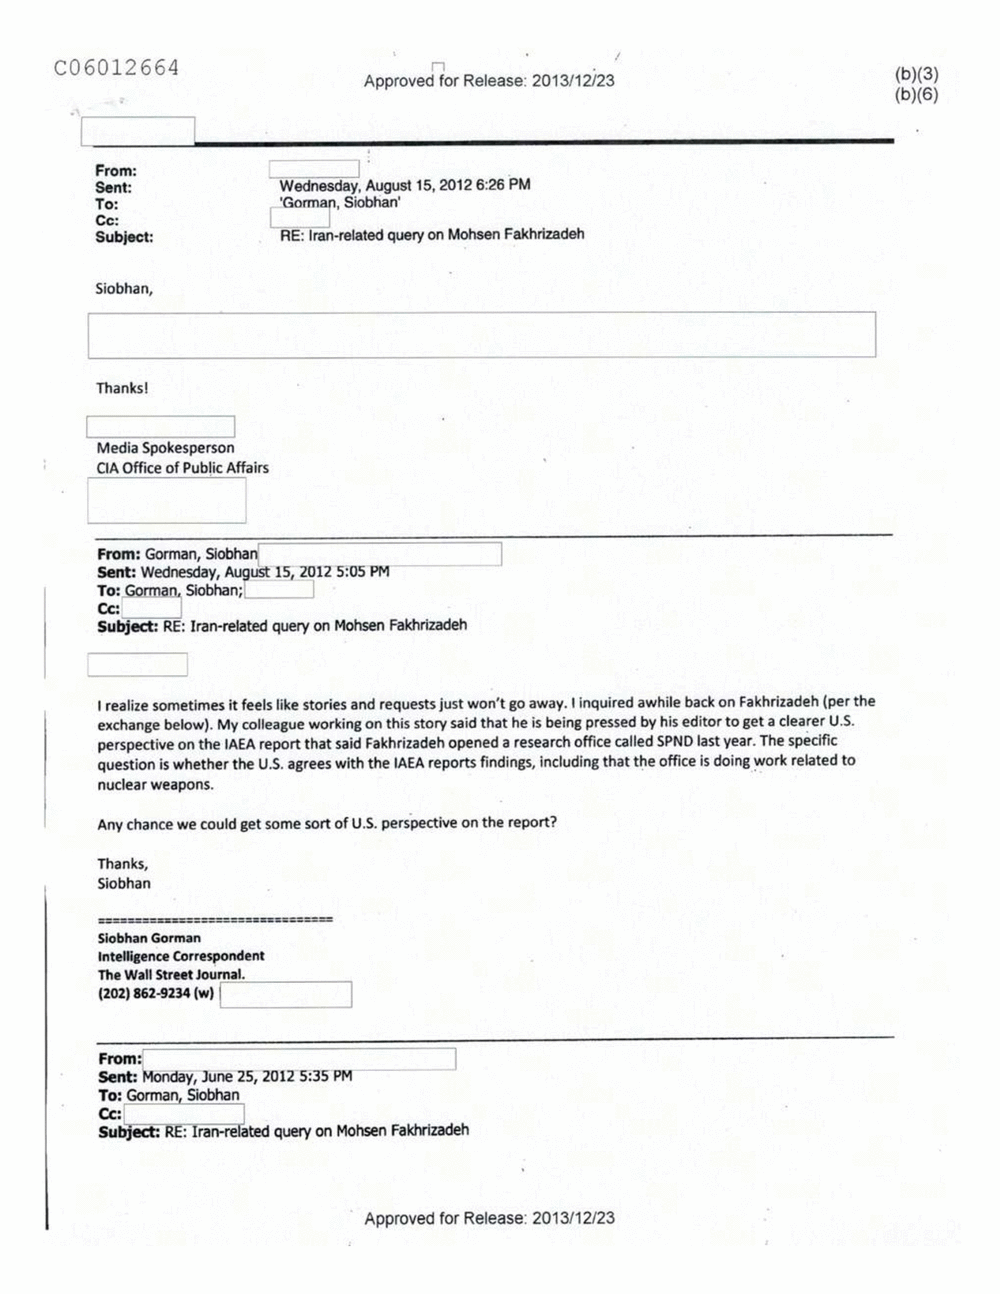 Page 242 from Email Correspondence Between Reporters and CIA Flacks